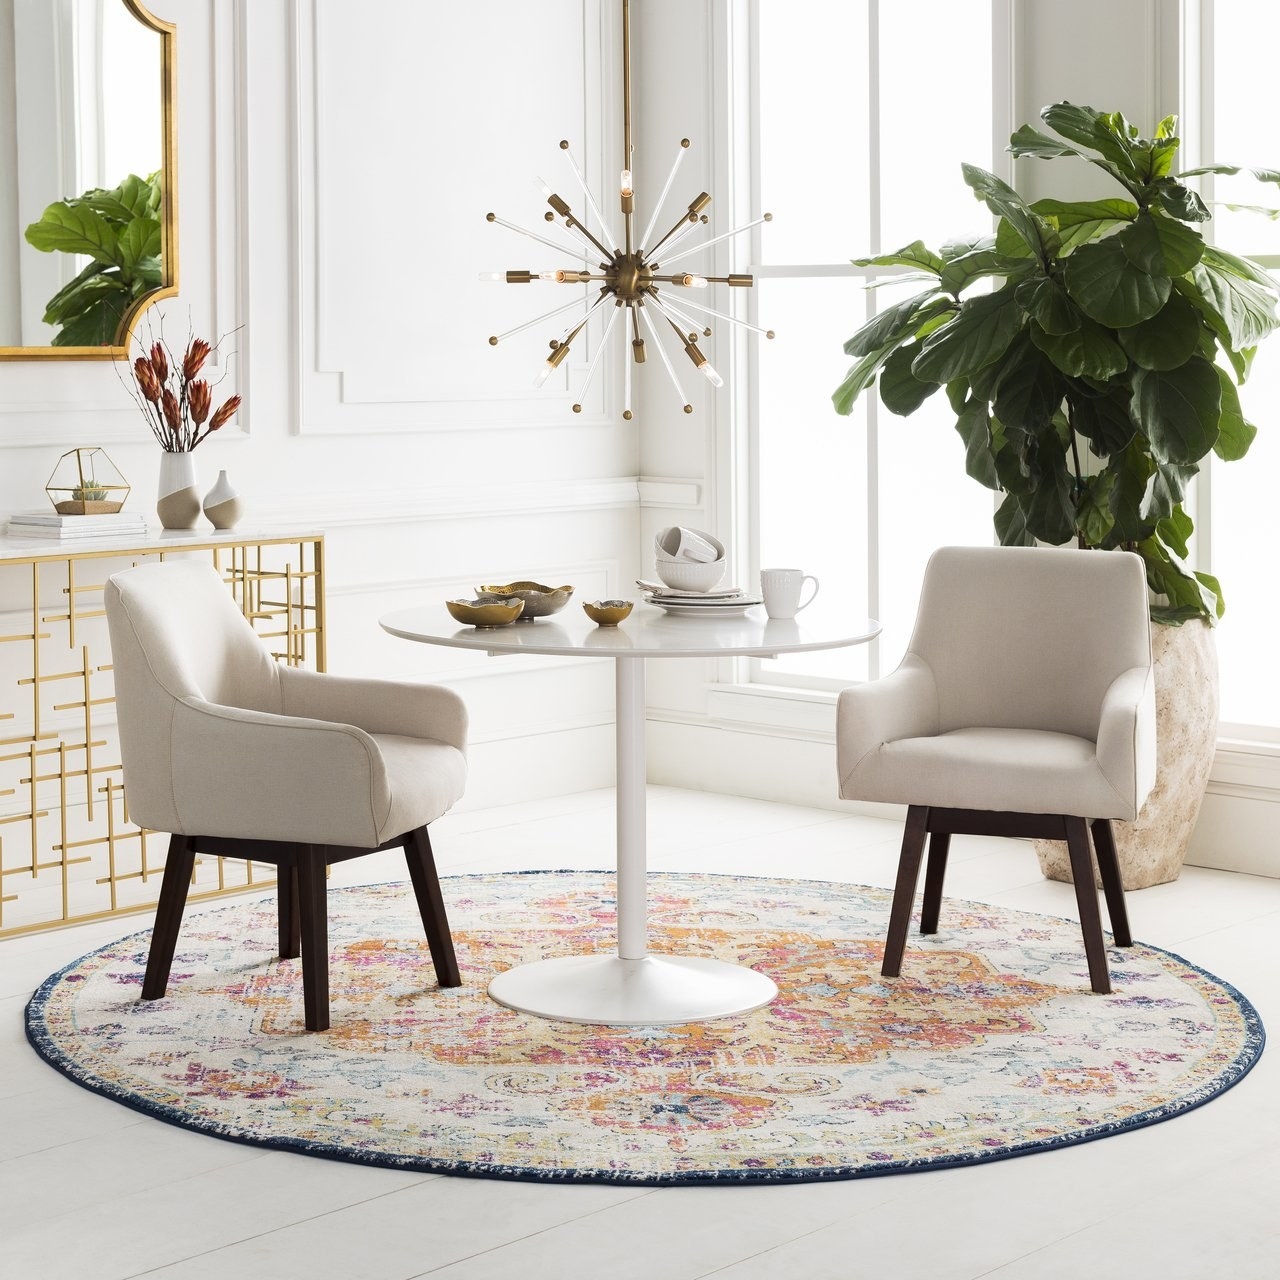 pattern round throw rug under dinner table and chairs